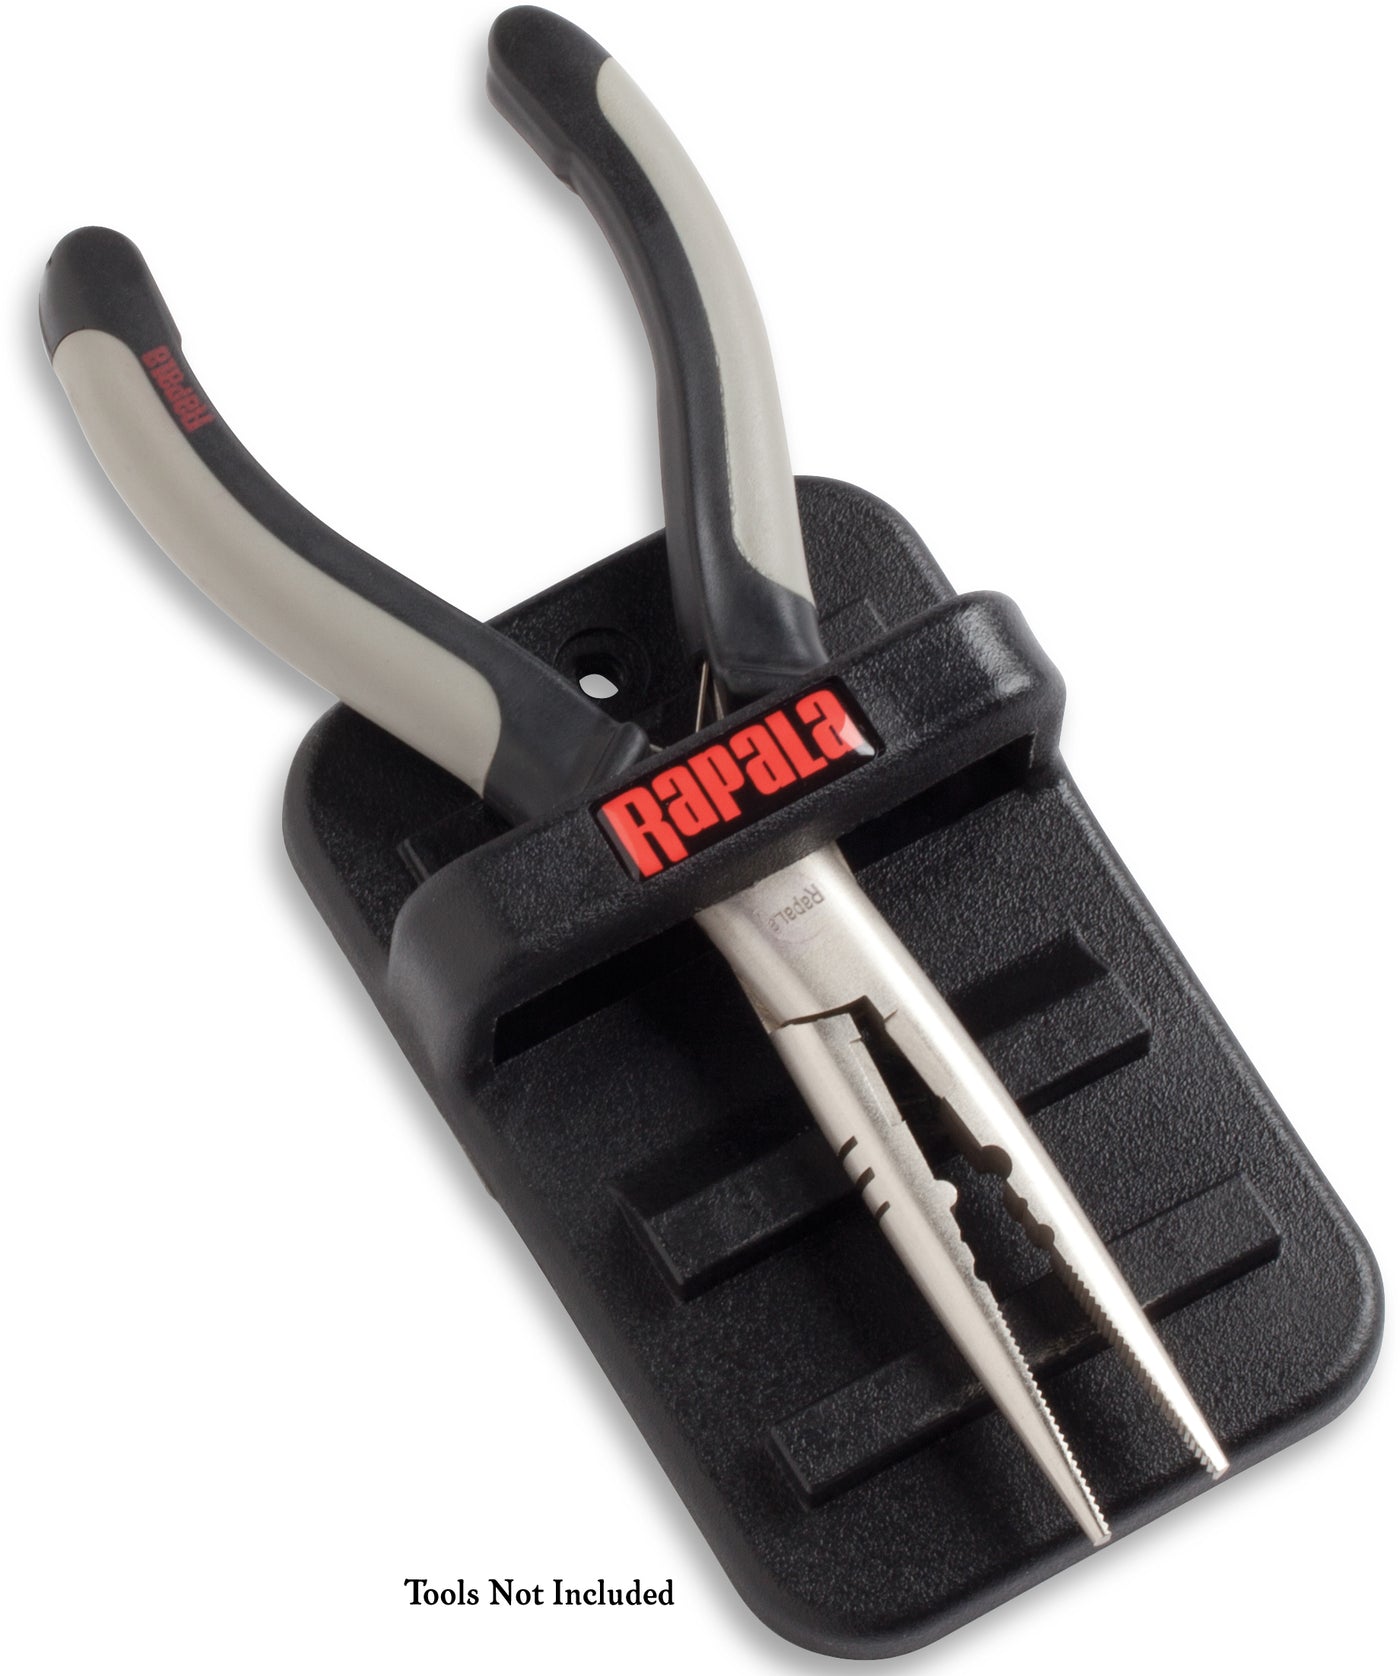 Rapala magnetic plier and fishing tool holder combo